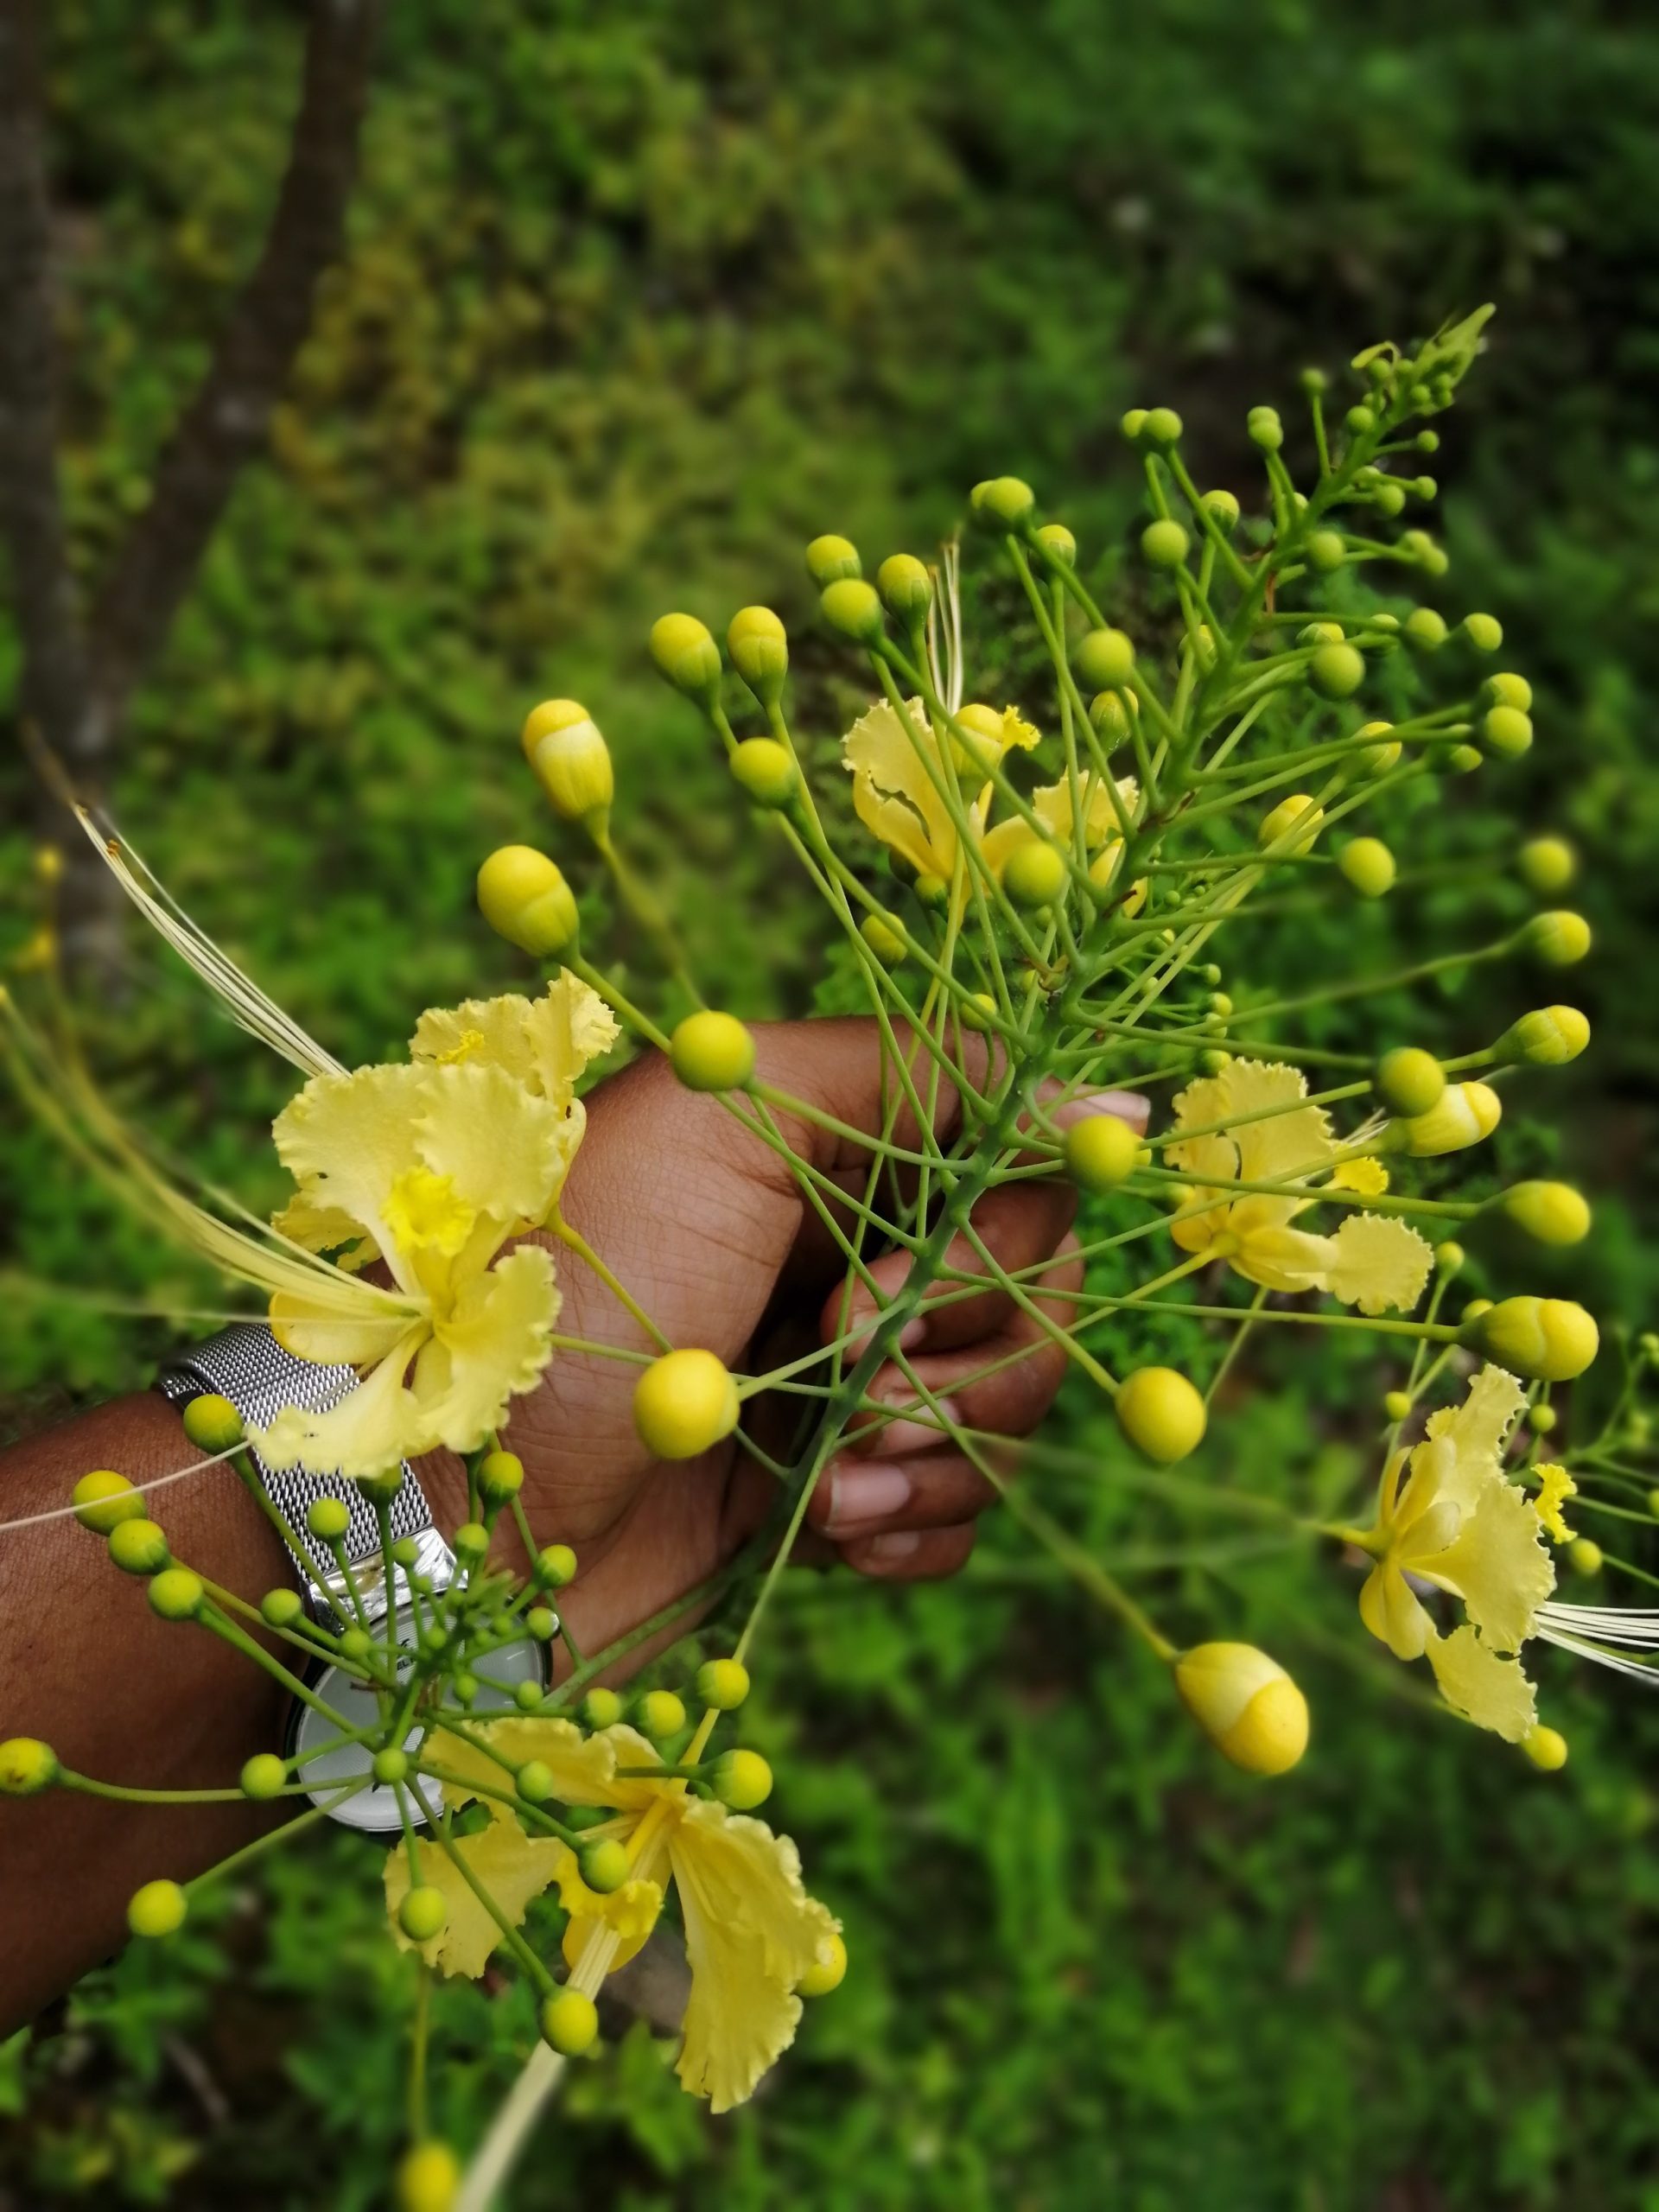 Hand holding a yellow flower